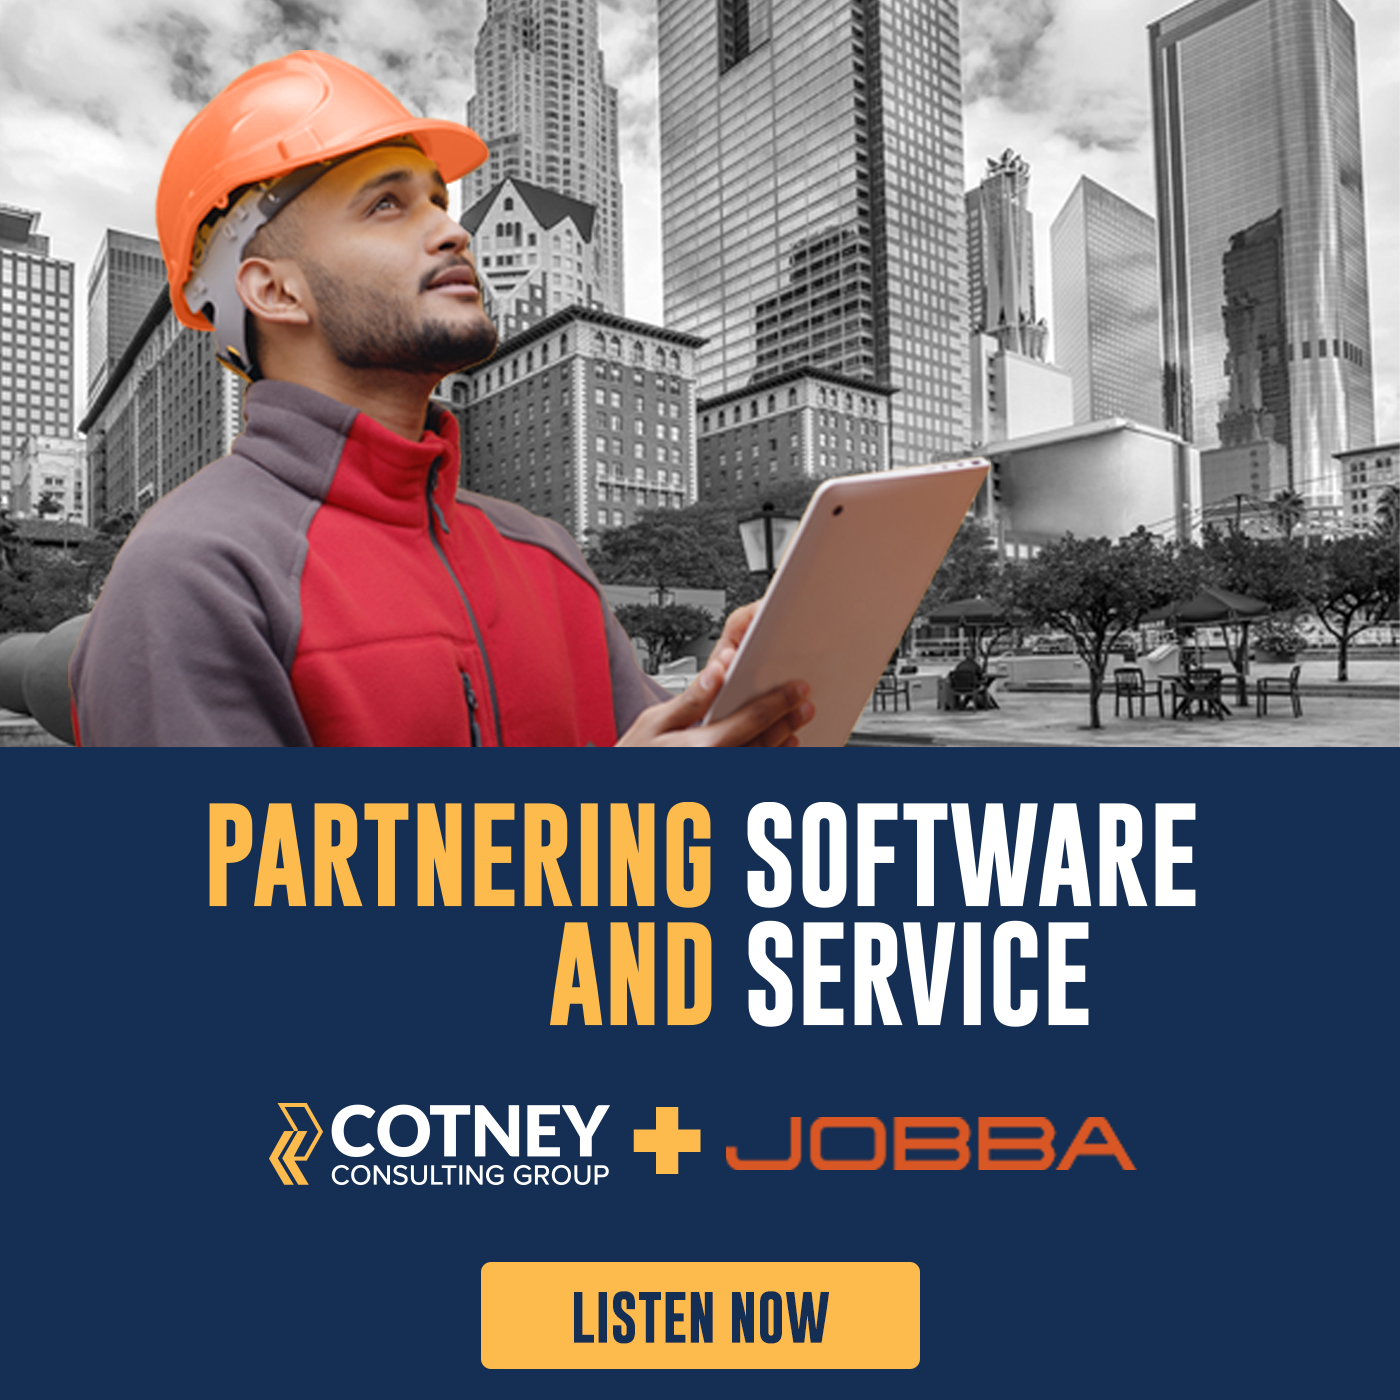 Cotney & JOBBA RLW - Partnering Software and Service - POD